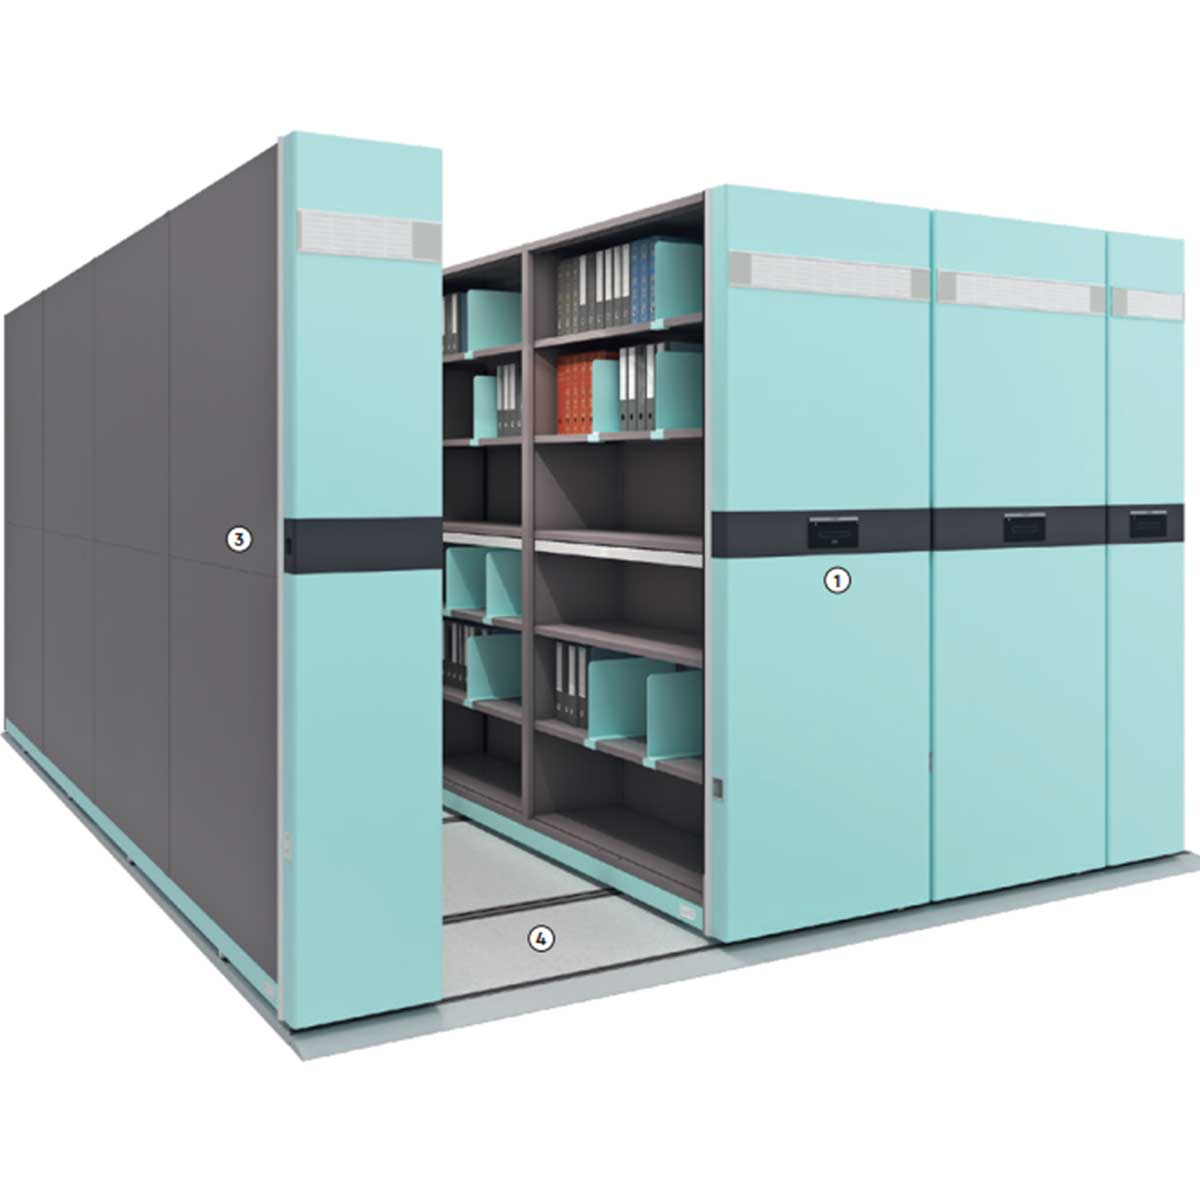 Mobile compactor storage Manufacturers, Suppliers in Munirka